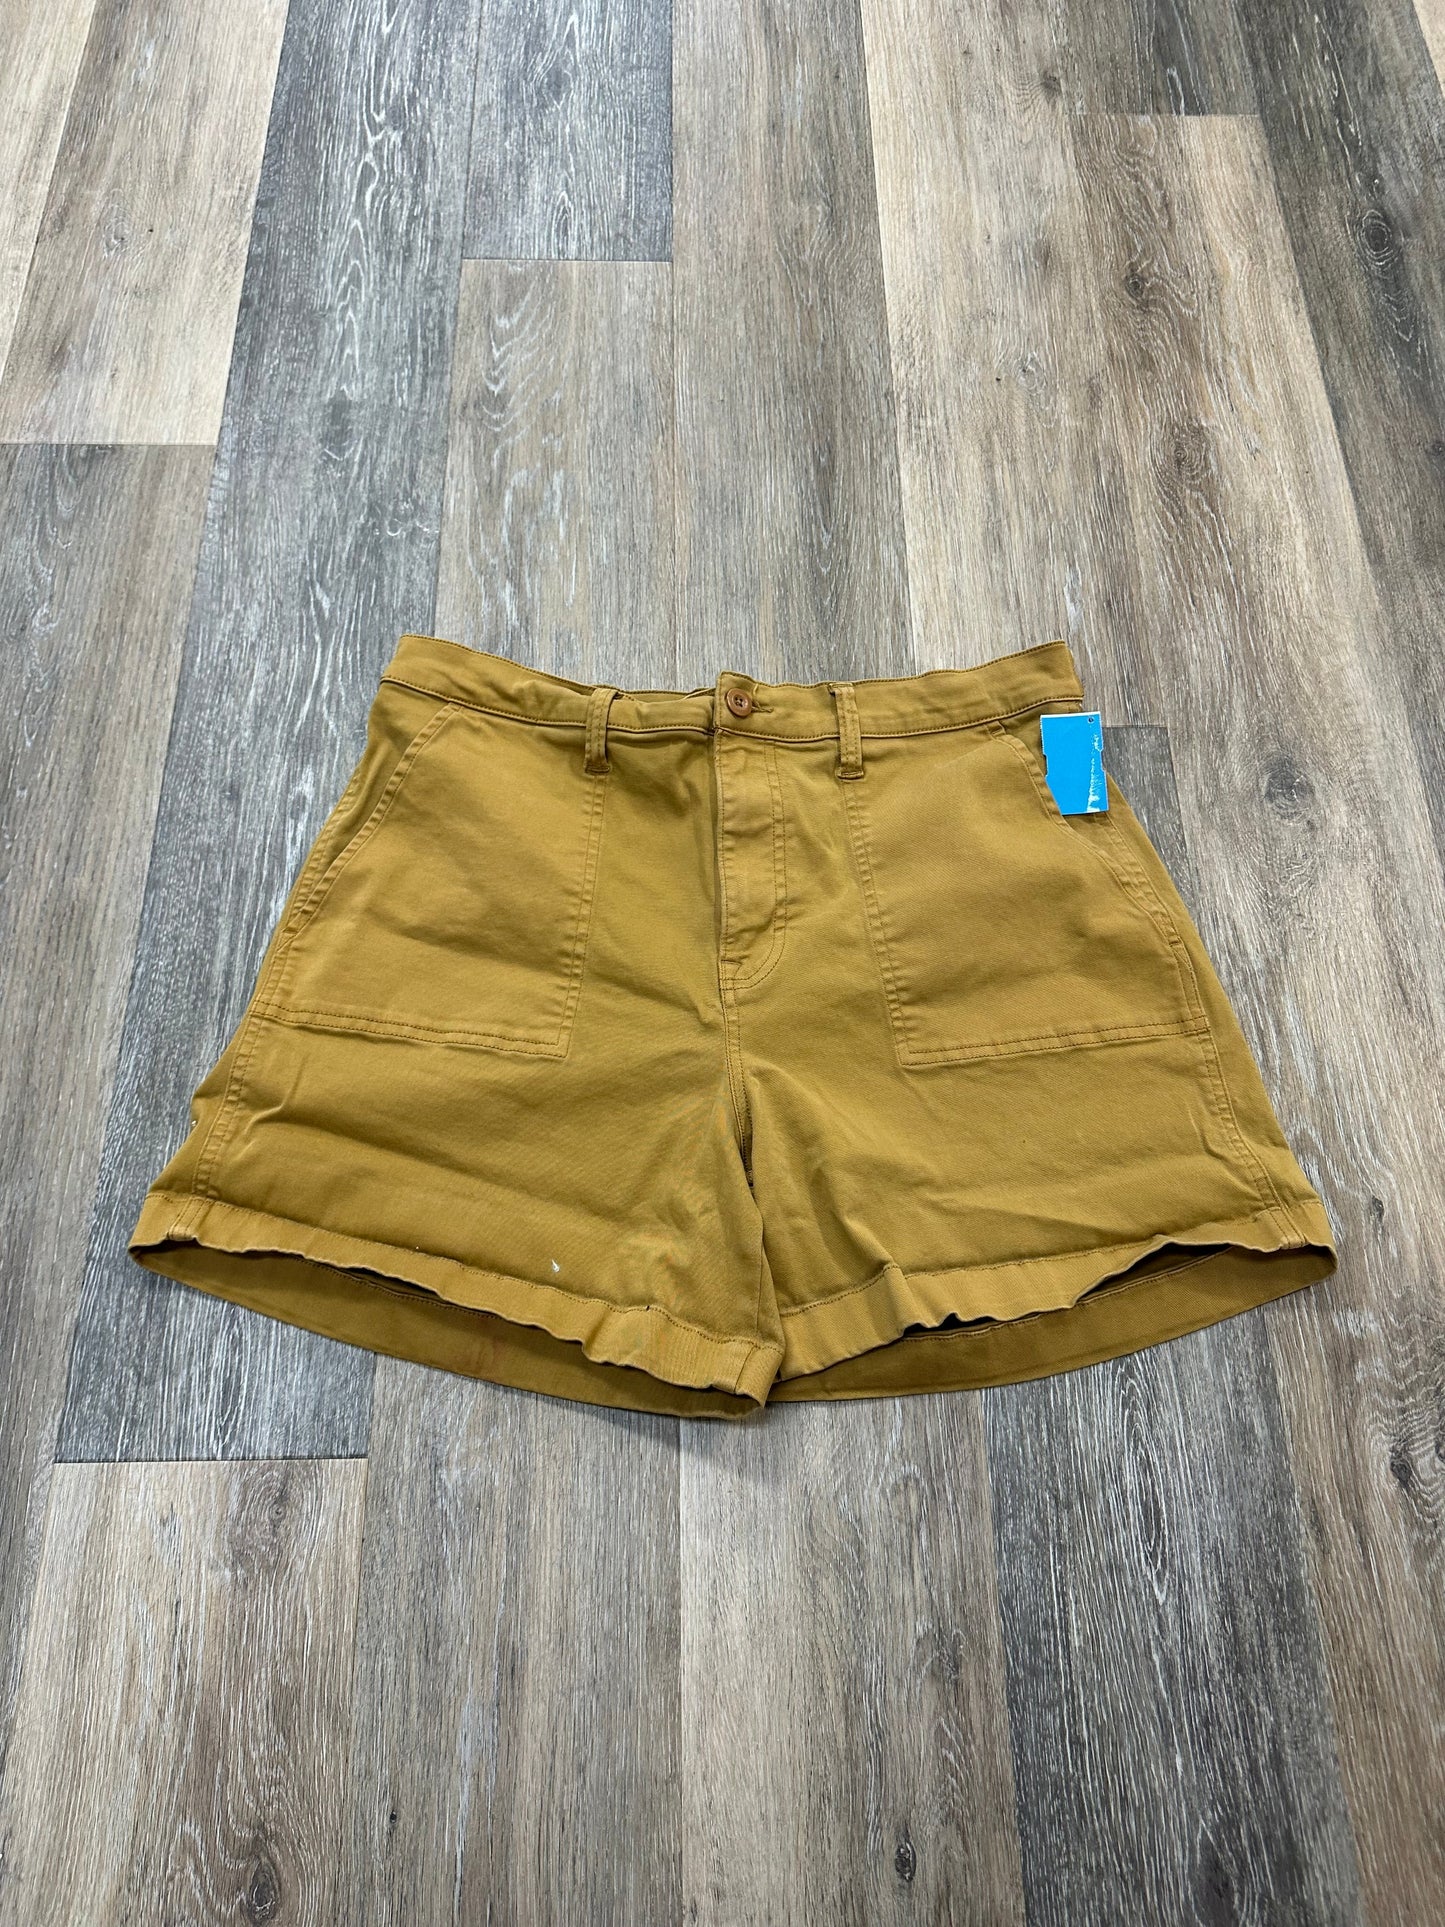 Yellow Shorts Lucky Brand, Size 12